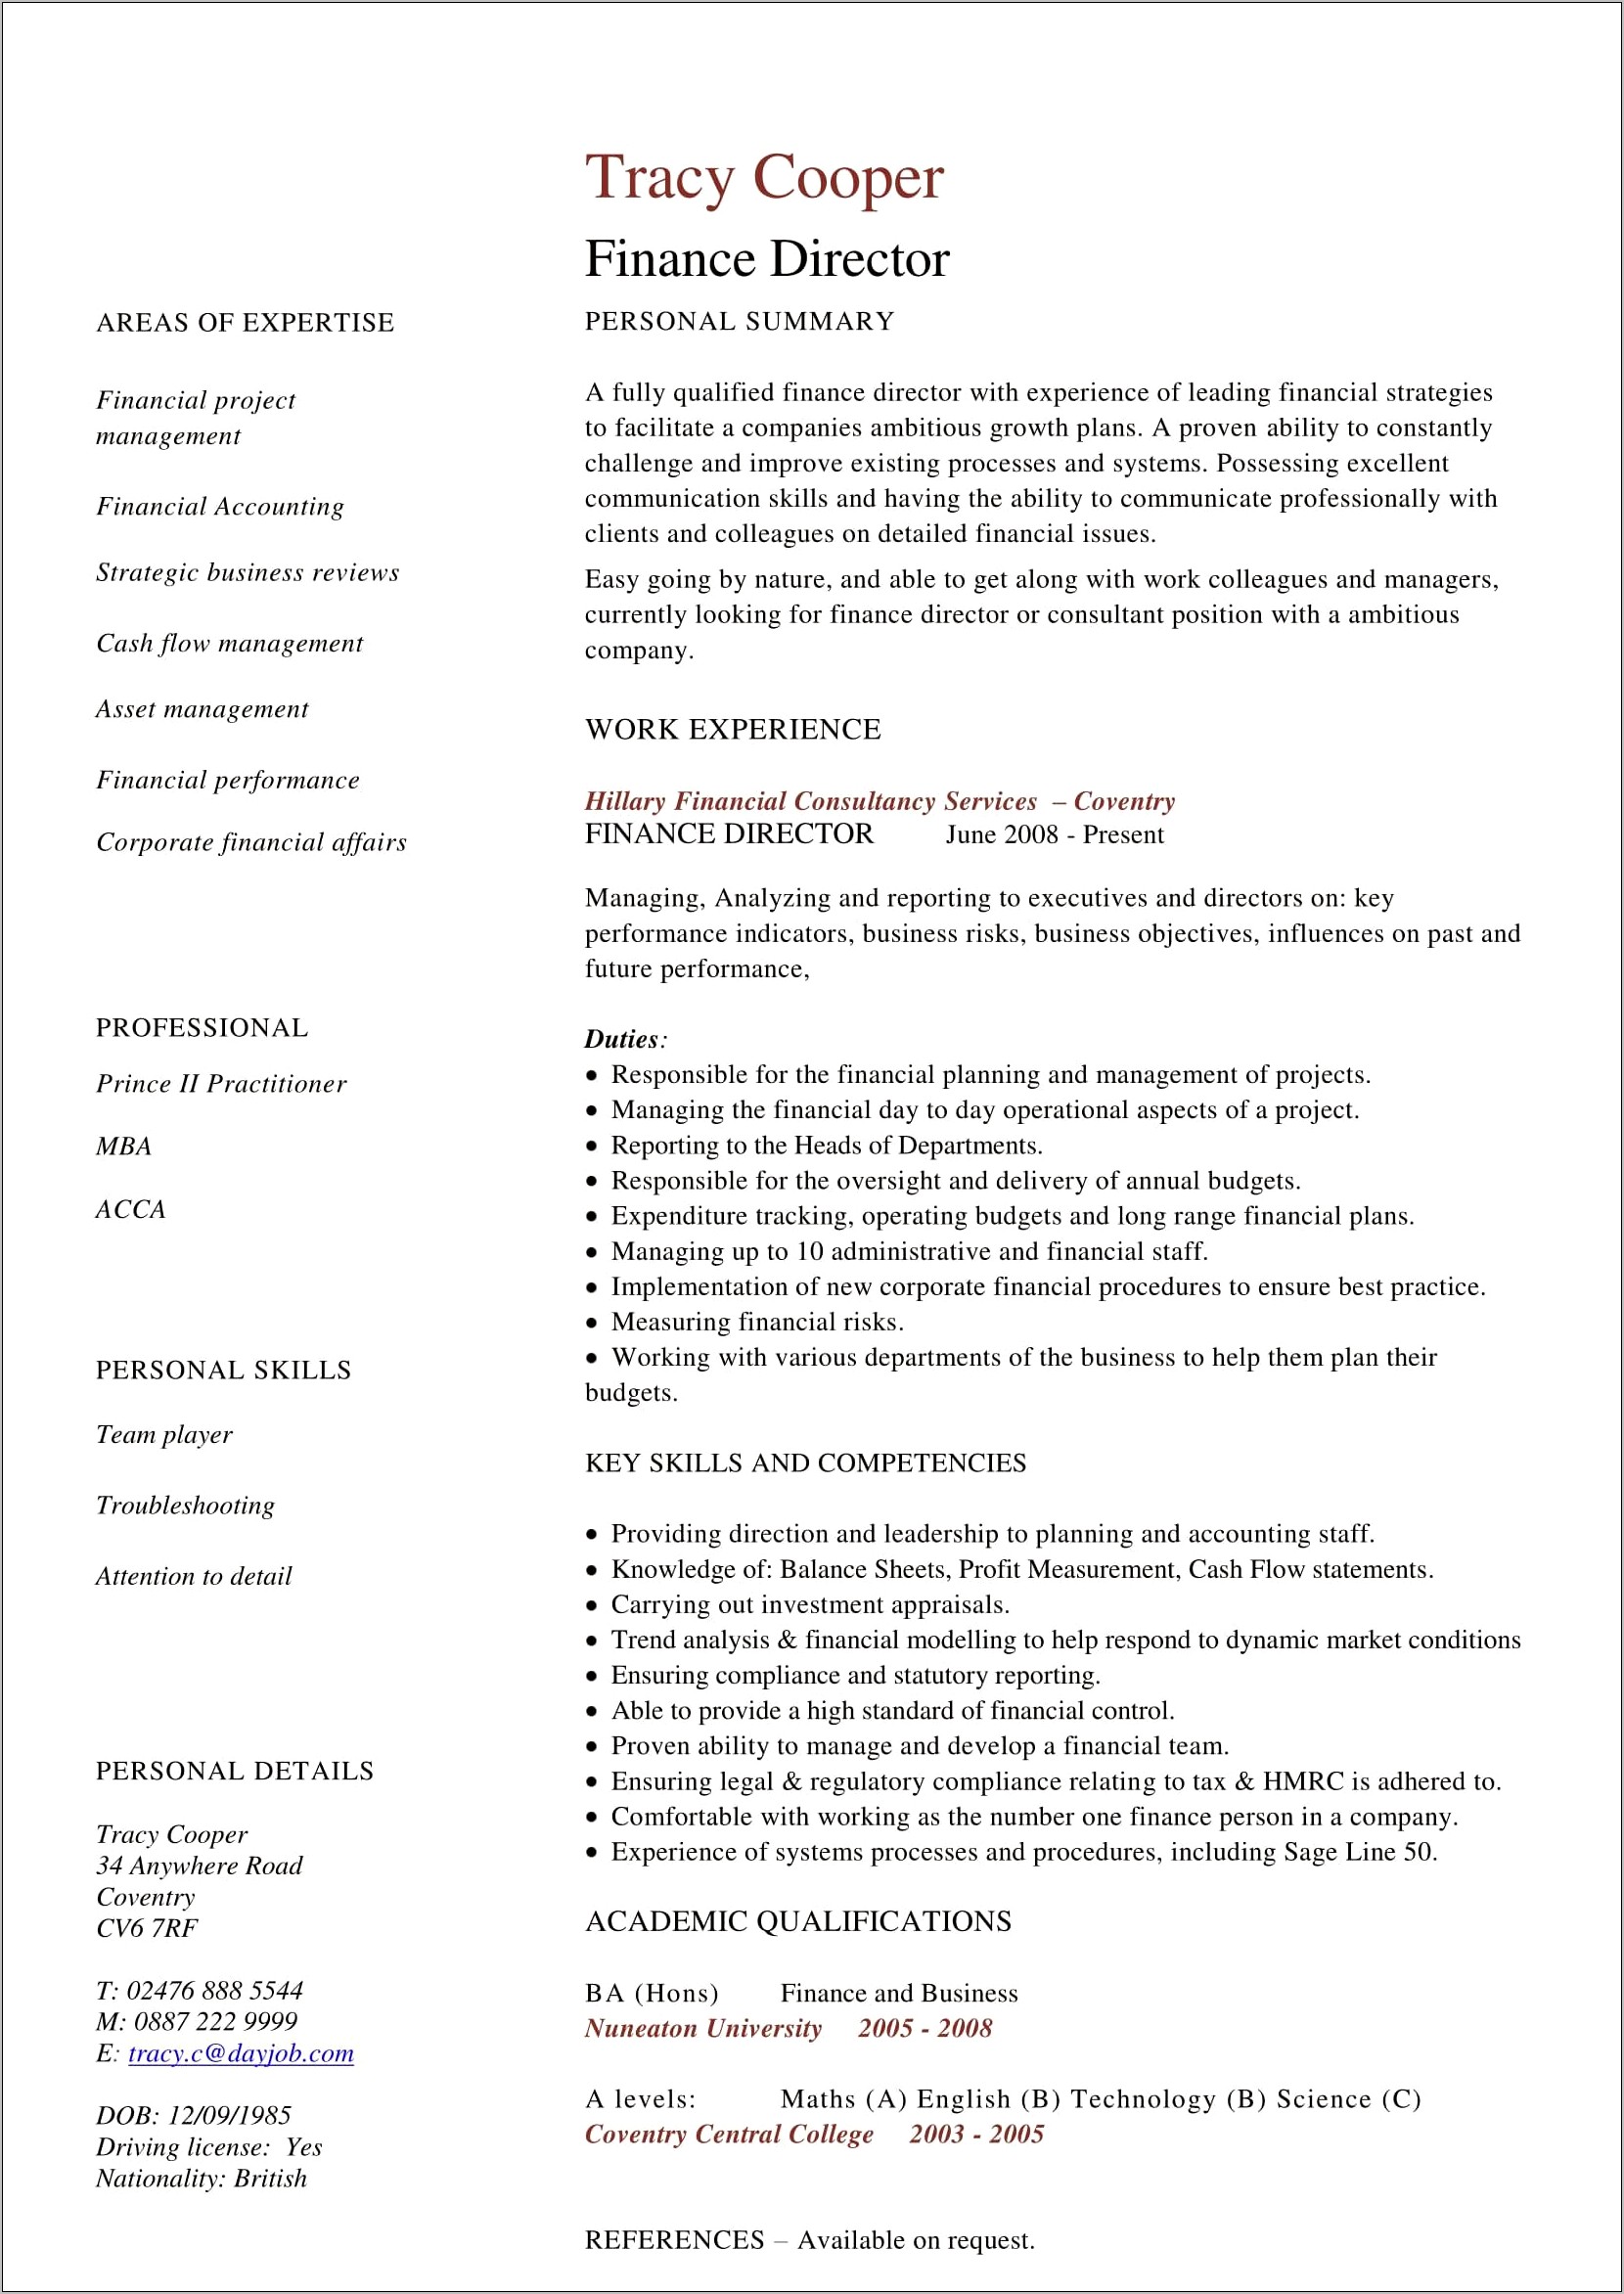 Resume Sample From A Finance Person